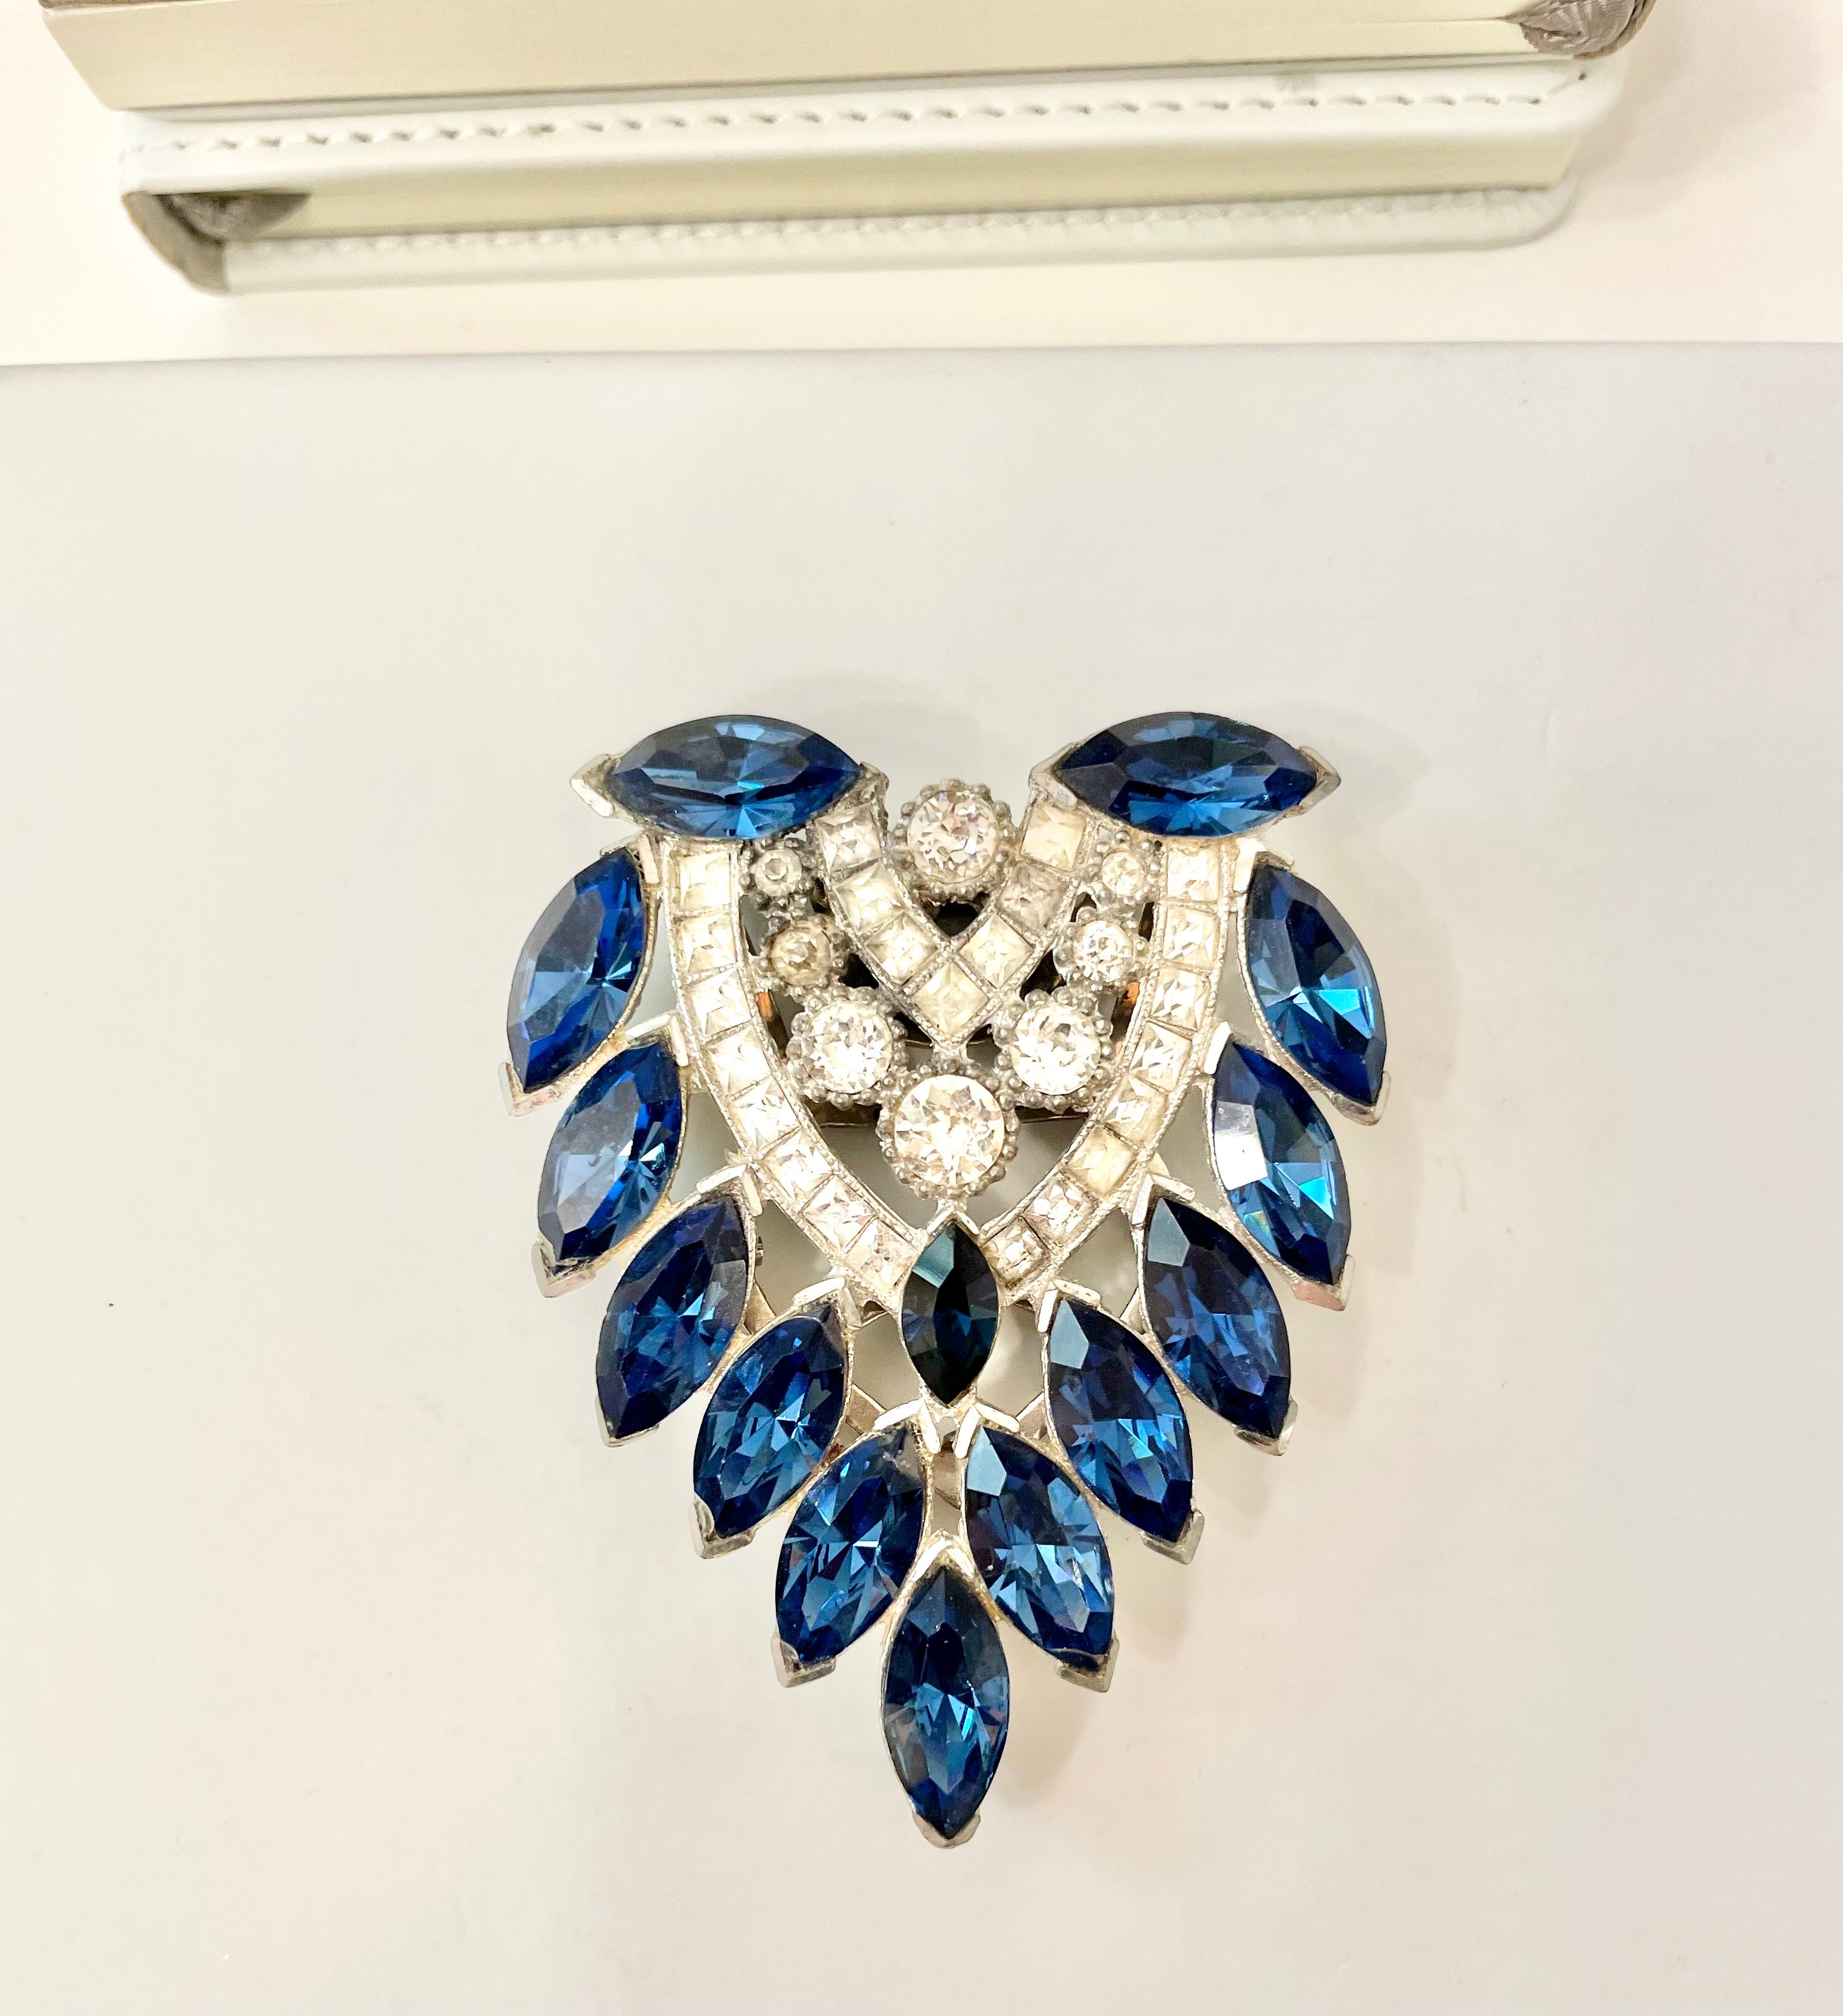 Vintage 1930's paste style sapphire glass, stunning fur clip...truly beautiful